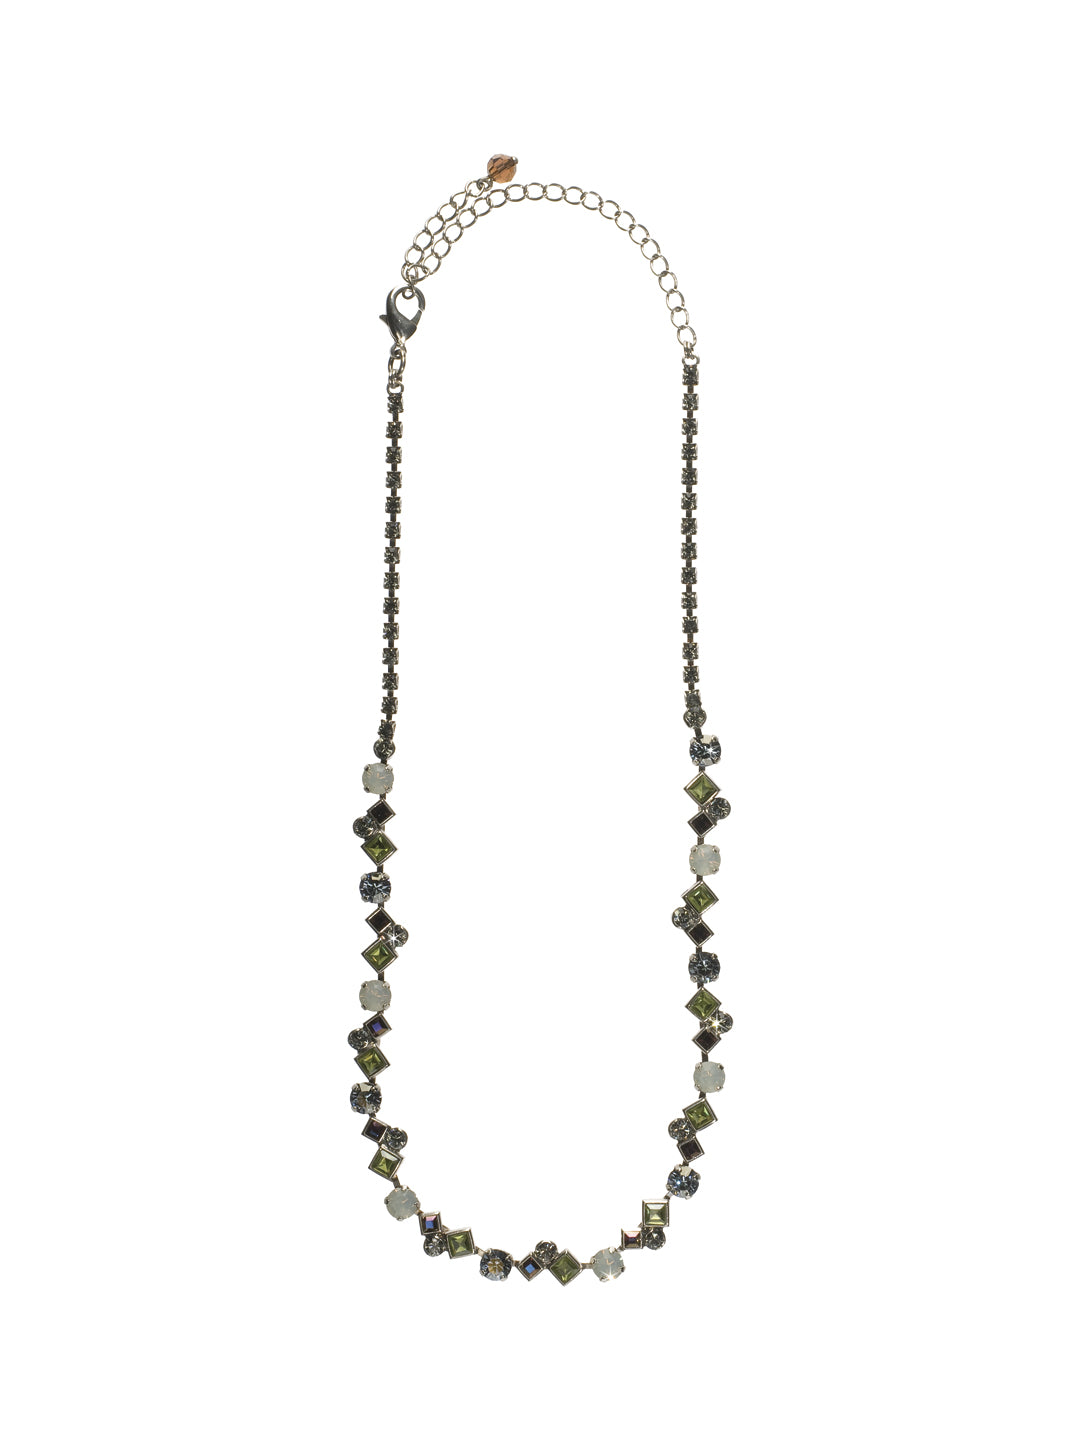 Elegant Moves Necklace Tennis Necklace - NCM15ASCJ - Keep all eyes on you with this dazzling necklace. Multi-shaped crystals create gentle movement along the neckline while a straight radiant chain makes you the focal point. From Sorrelli's Concrete Jungle collection in our Antique Silver-tone finish.